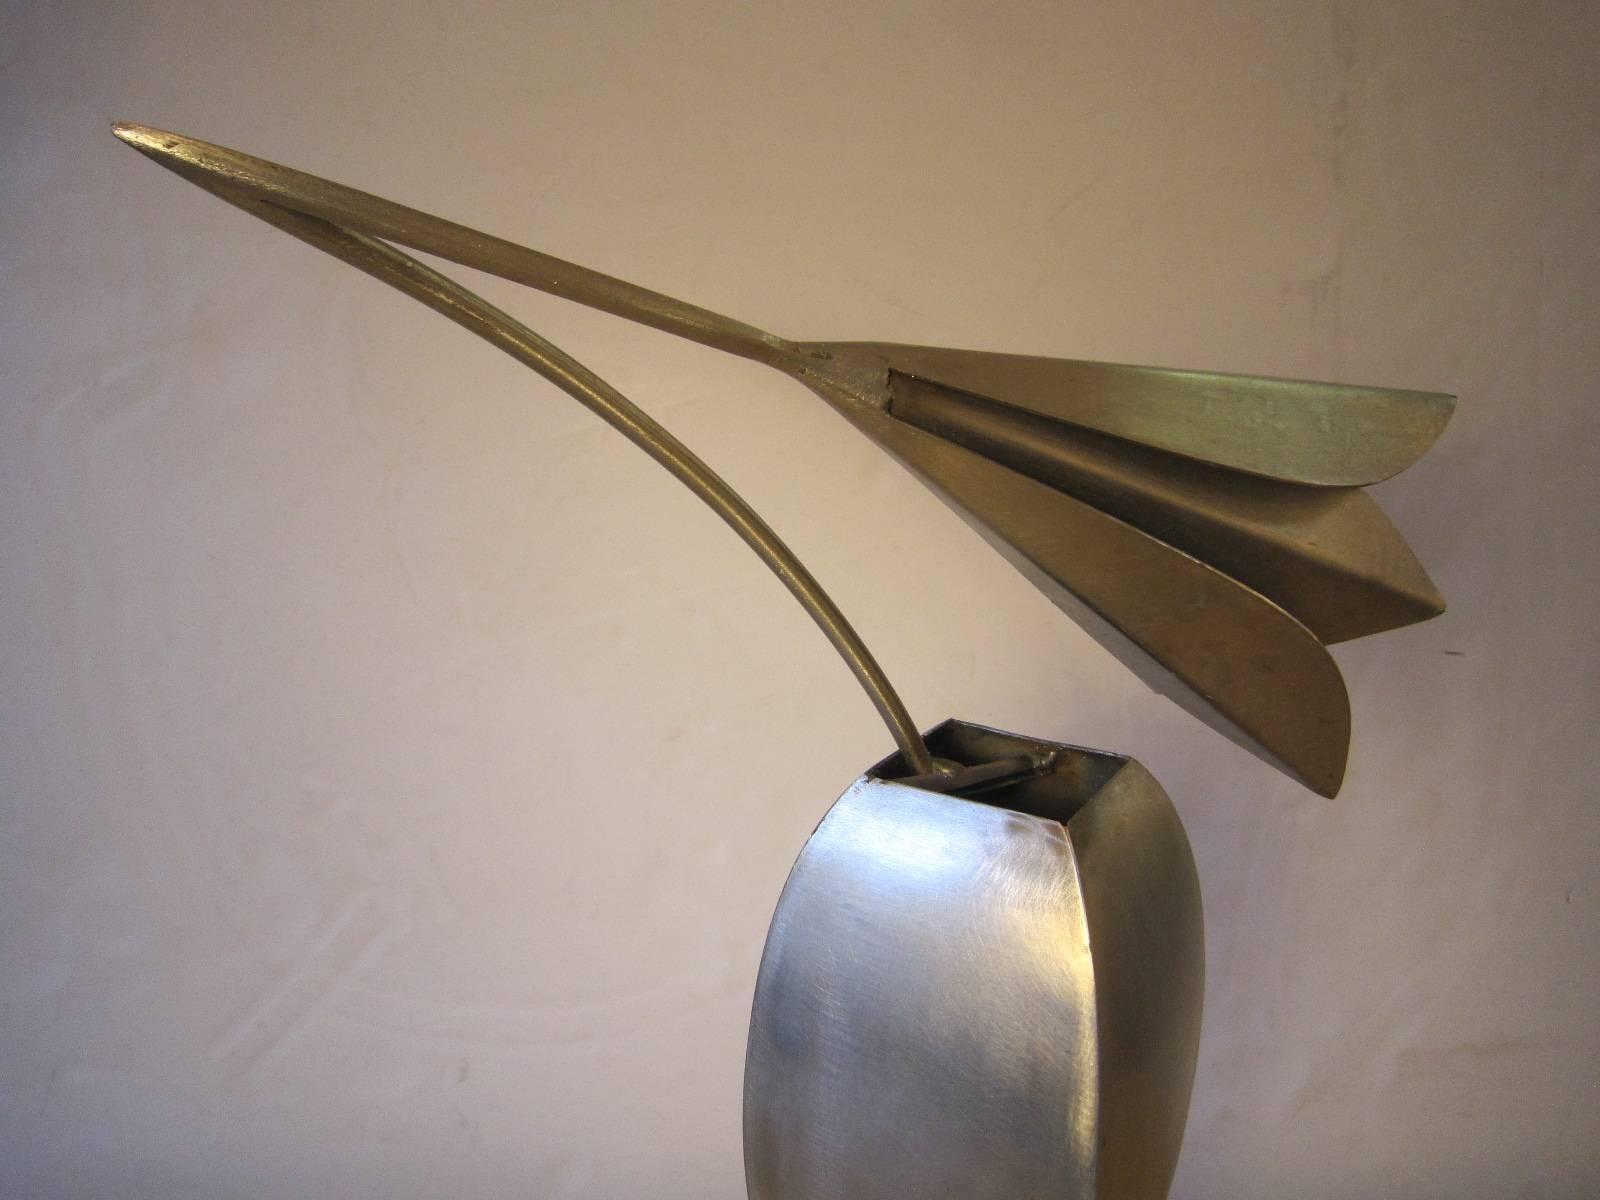 Brutalist Abstract Cubist Steel Sculpture Signed Peter Charles, 1988